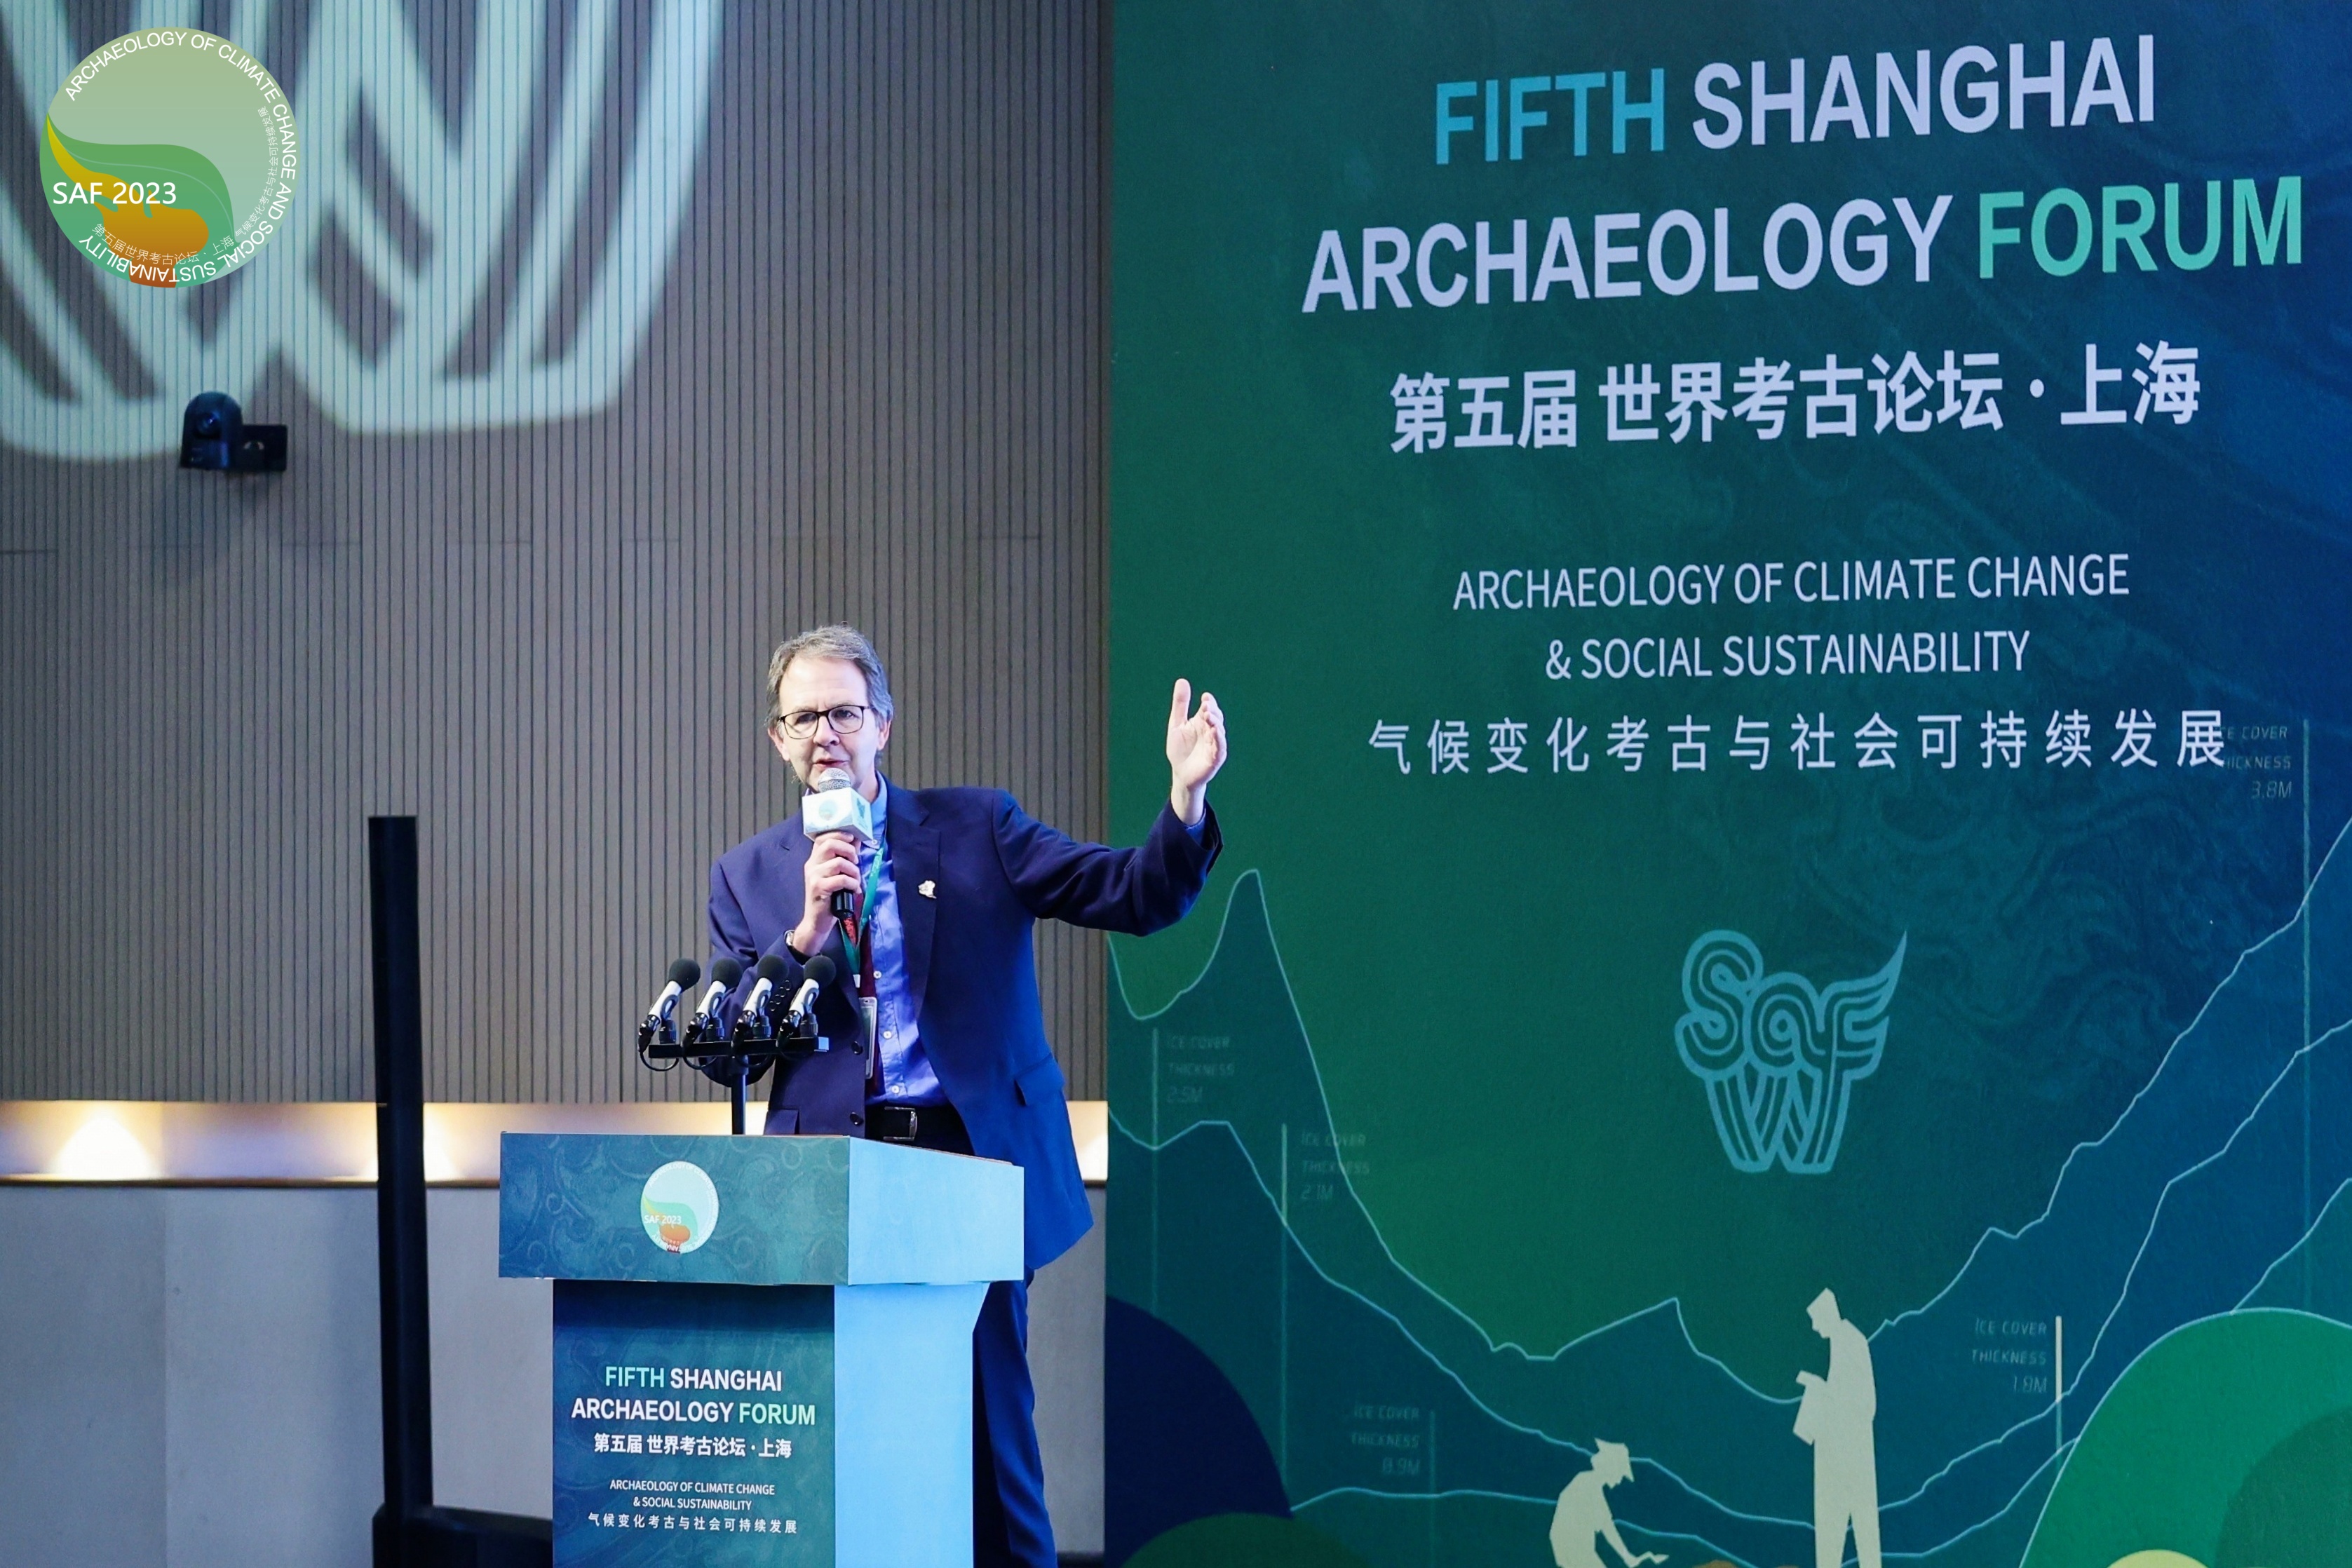 Larry Barham speaking at a podium at the world archaeological forum in Shanghai